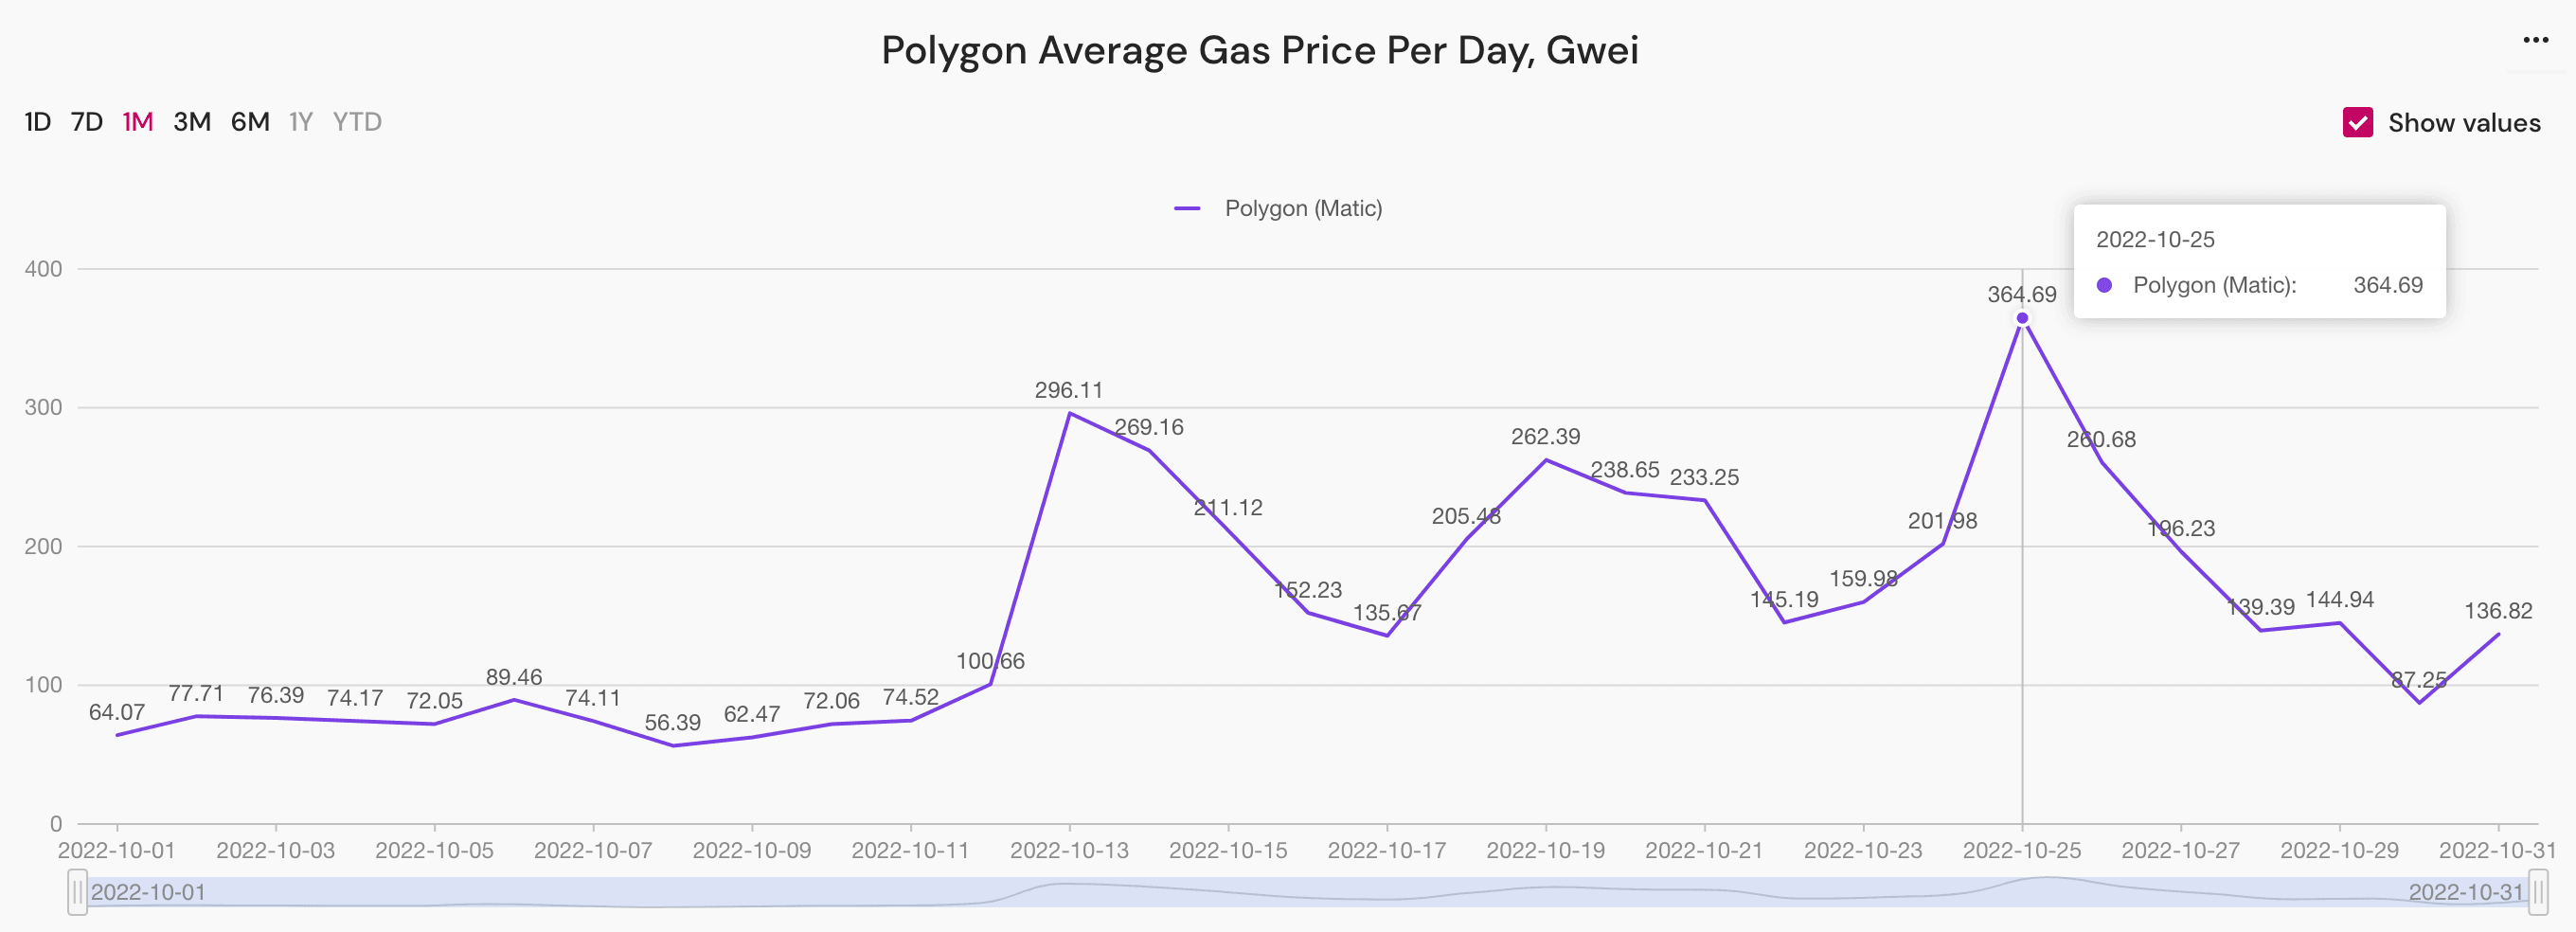 polygon average gas price per day in October 2022